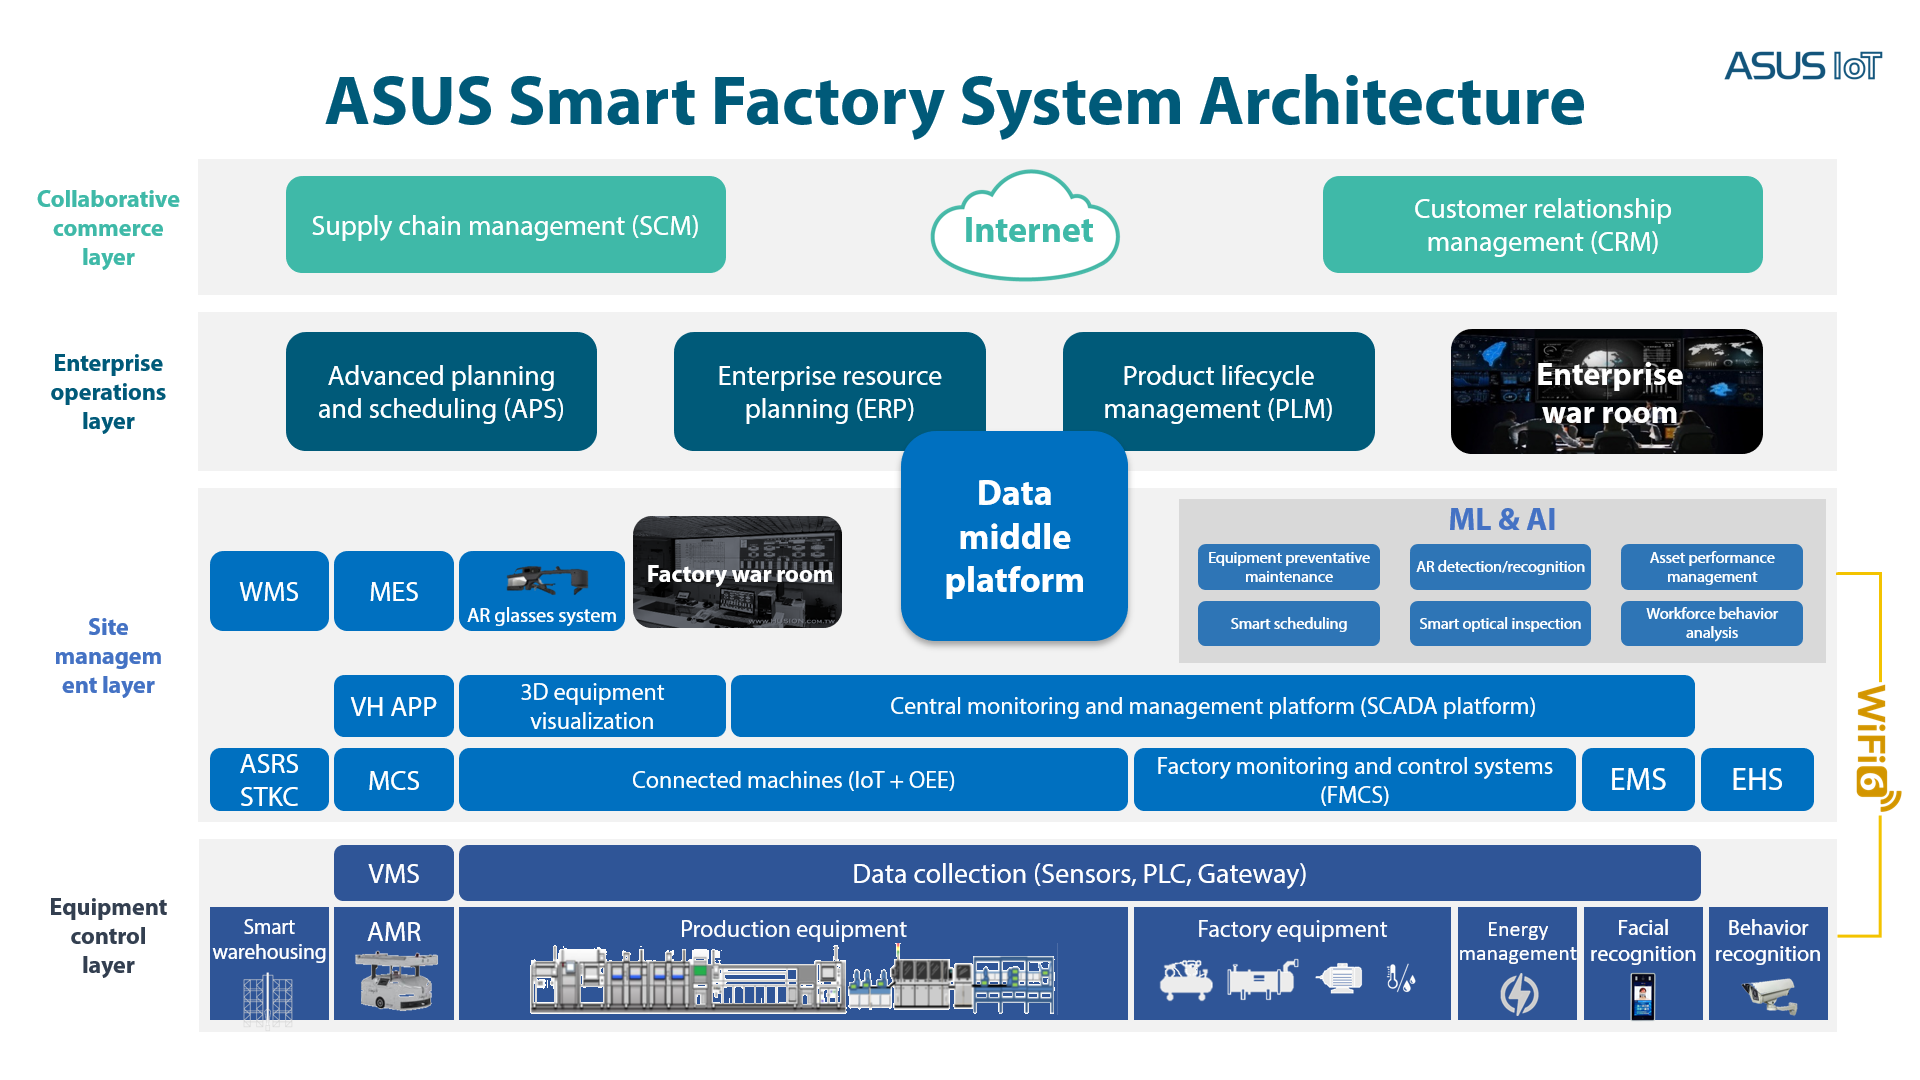 The ASUS Smart Factory System Architecture image showcases an advanced technological setup: Equipment, site, and operations layers connected.